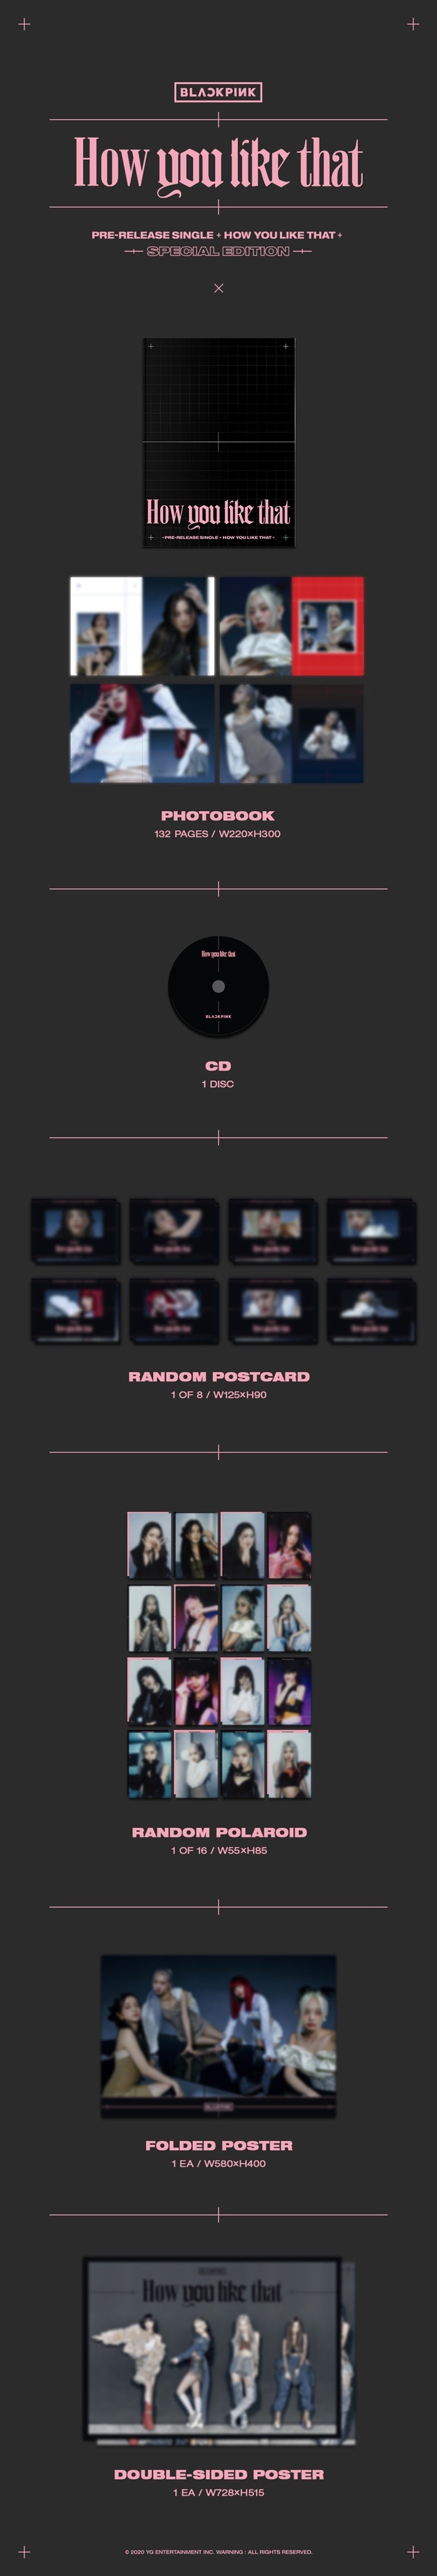 < Part >    - - CD  - - PHOTOBOOK : 132p  - - RANDOM POLAROID : 1p  - - RANDOM POSTCARD : 1p   - - FOLDED POSTER : 1p   - - DOUBLE SIDE POSTER : 1p  (For the First press only)    BLACKPINK SPECIAL EDITION  [How You Like That]     The pre-released single "How You Like That" is a hip-hop song featuring Black Pink's unique personality and charismatic sound. Dreamy and magnificent orchestra sounds overwhelm the atmosphere from the introduction, and BLACKPINK's intense conduction begins. Along with the determined emotional change, the rising vocals and the explosive drop part of "How You Like That" finally threw up instantly turn the mood of the song around. The powerful beat, which changes more and more strongly as the song progresses, further highlights Black Pink's message to move forward and fly higher in any dark situation.     TEDDY, Danny Chung wrote the lyrics for "How You Like That" with a group of top producers, and TEDDY, R.TEE, and 24 participated in the composition.